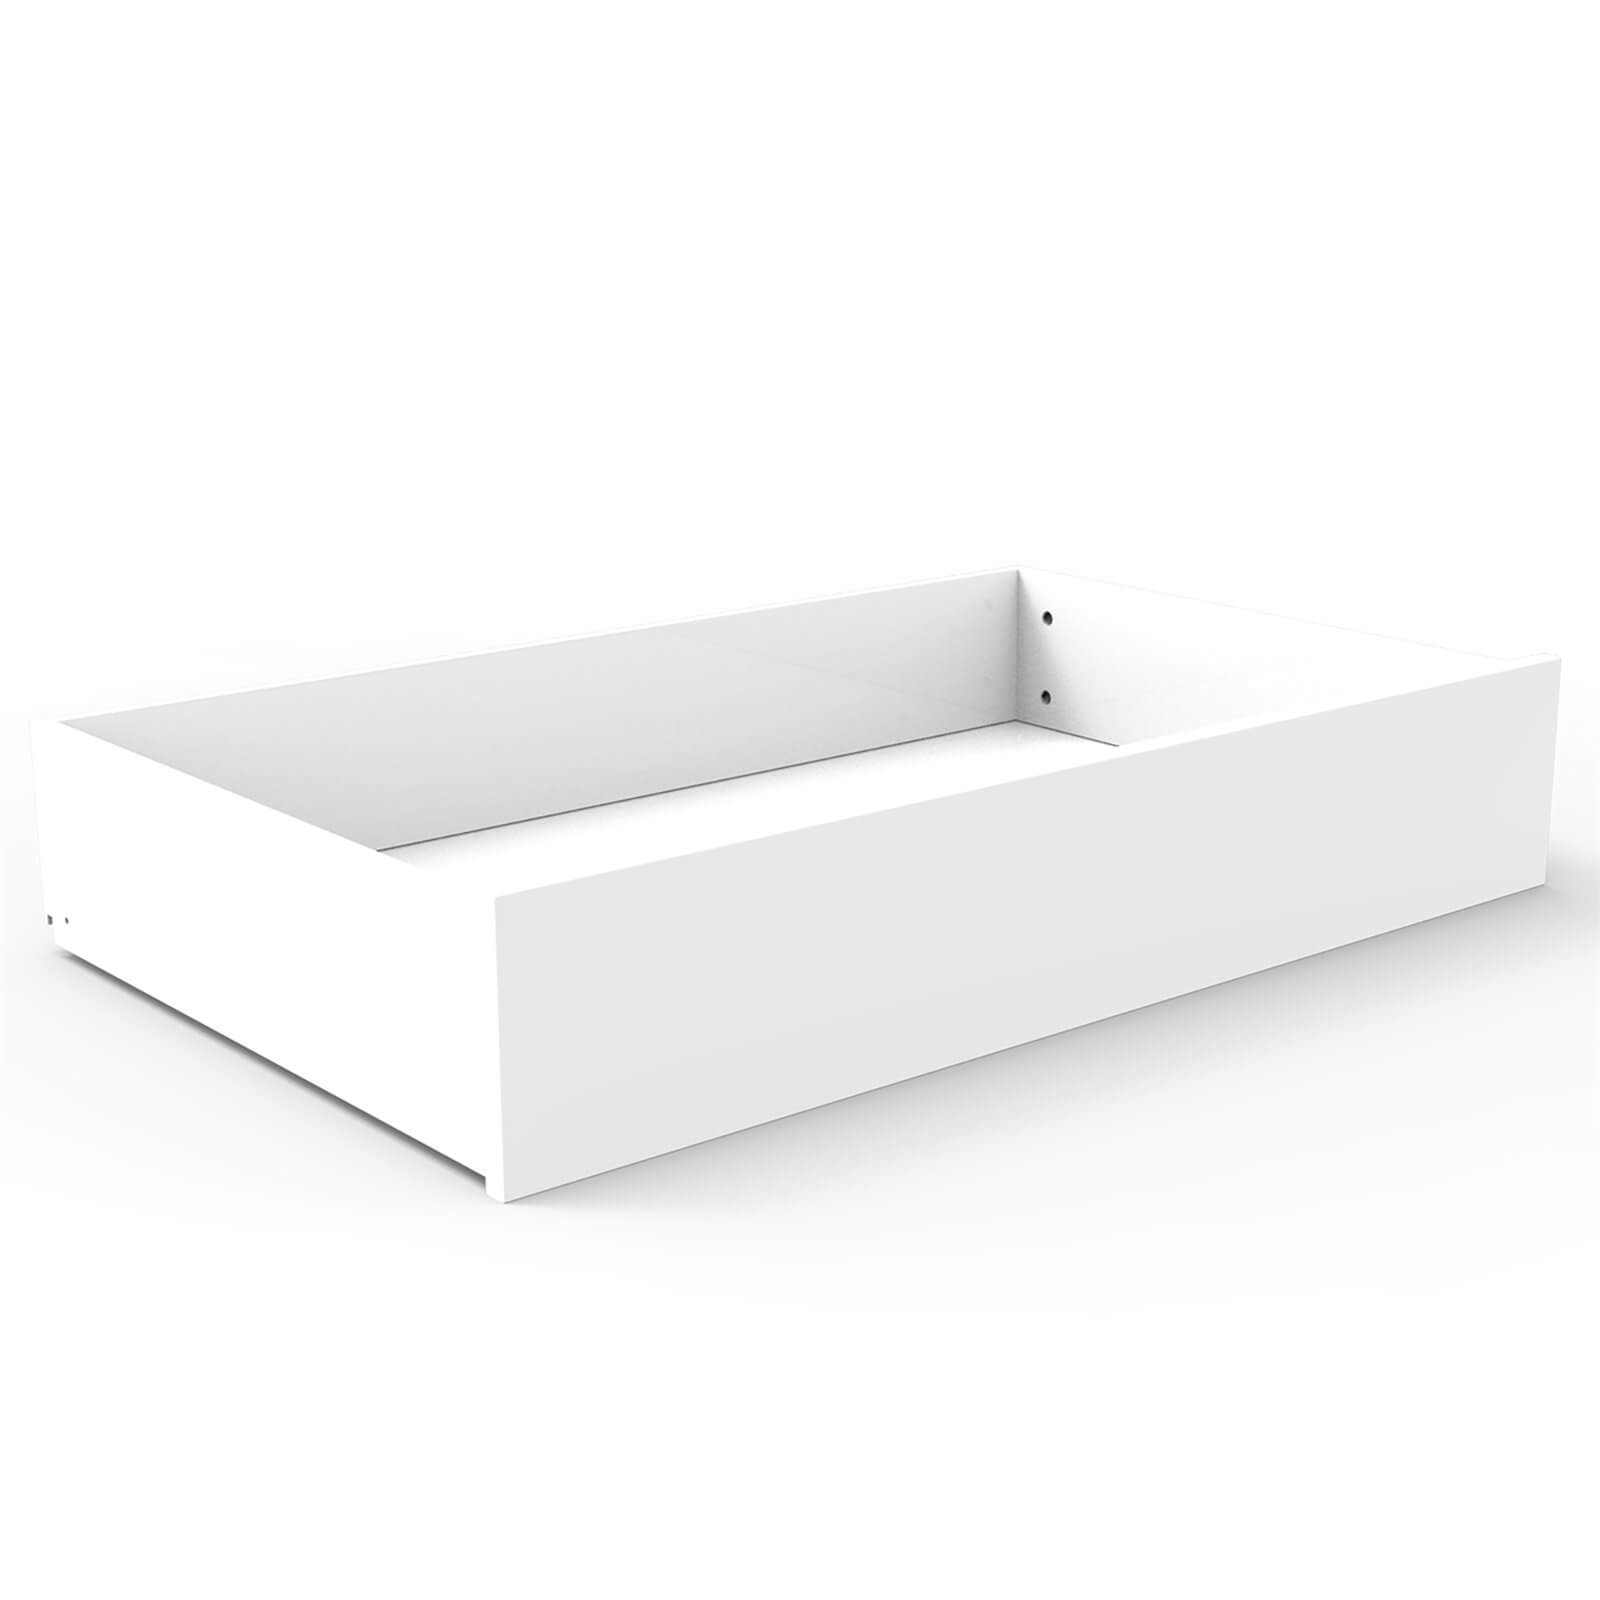 Photo of Fitted Bedroom Double Internal Drawer - White